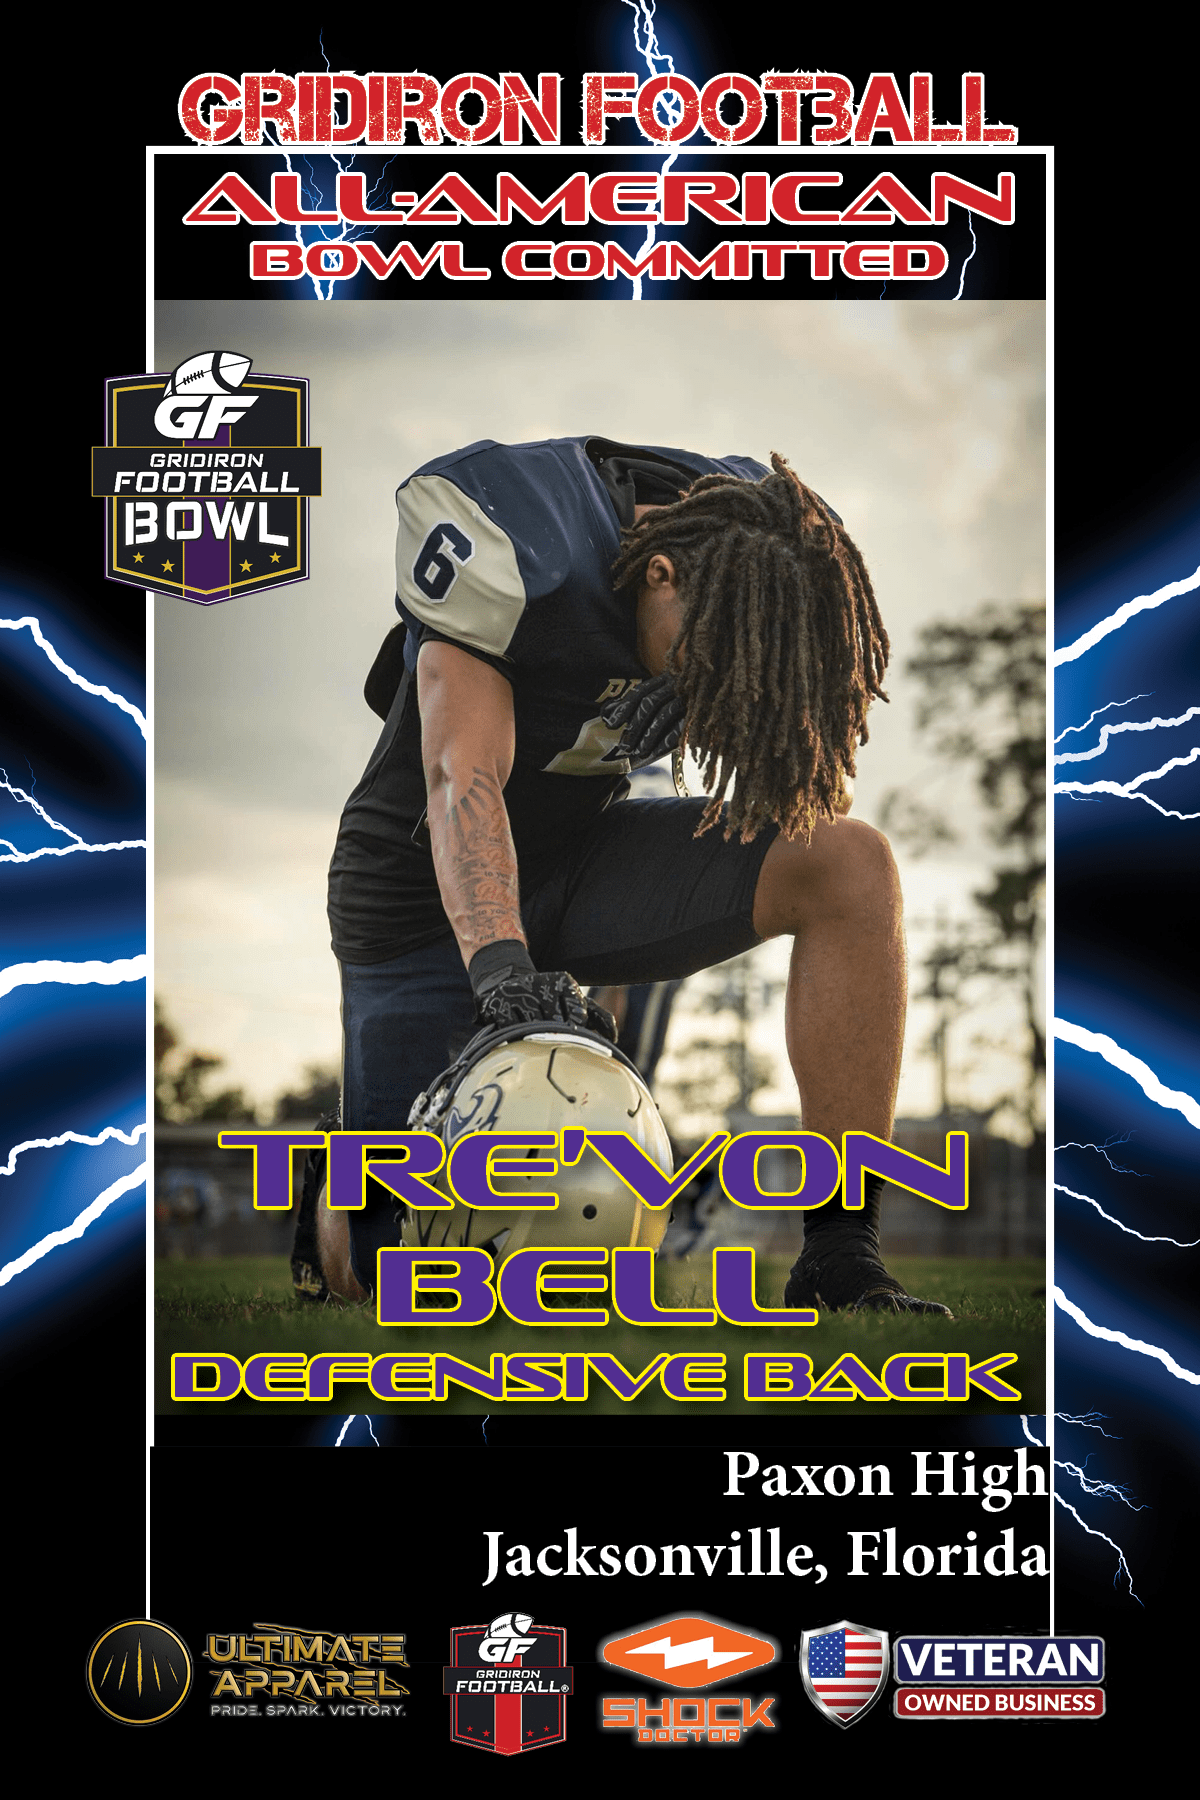 BREAKING NEWS: Paxon High School (Jacksonville, Fla.) DB Tre’von Bell has committed to the 2023 Gridiron Football All-American Bowl